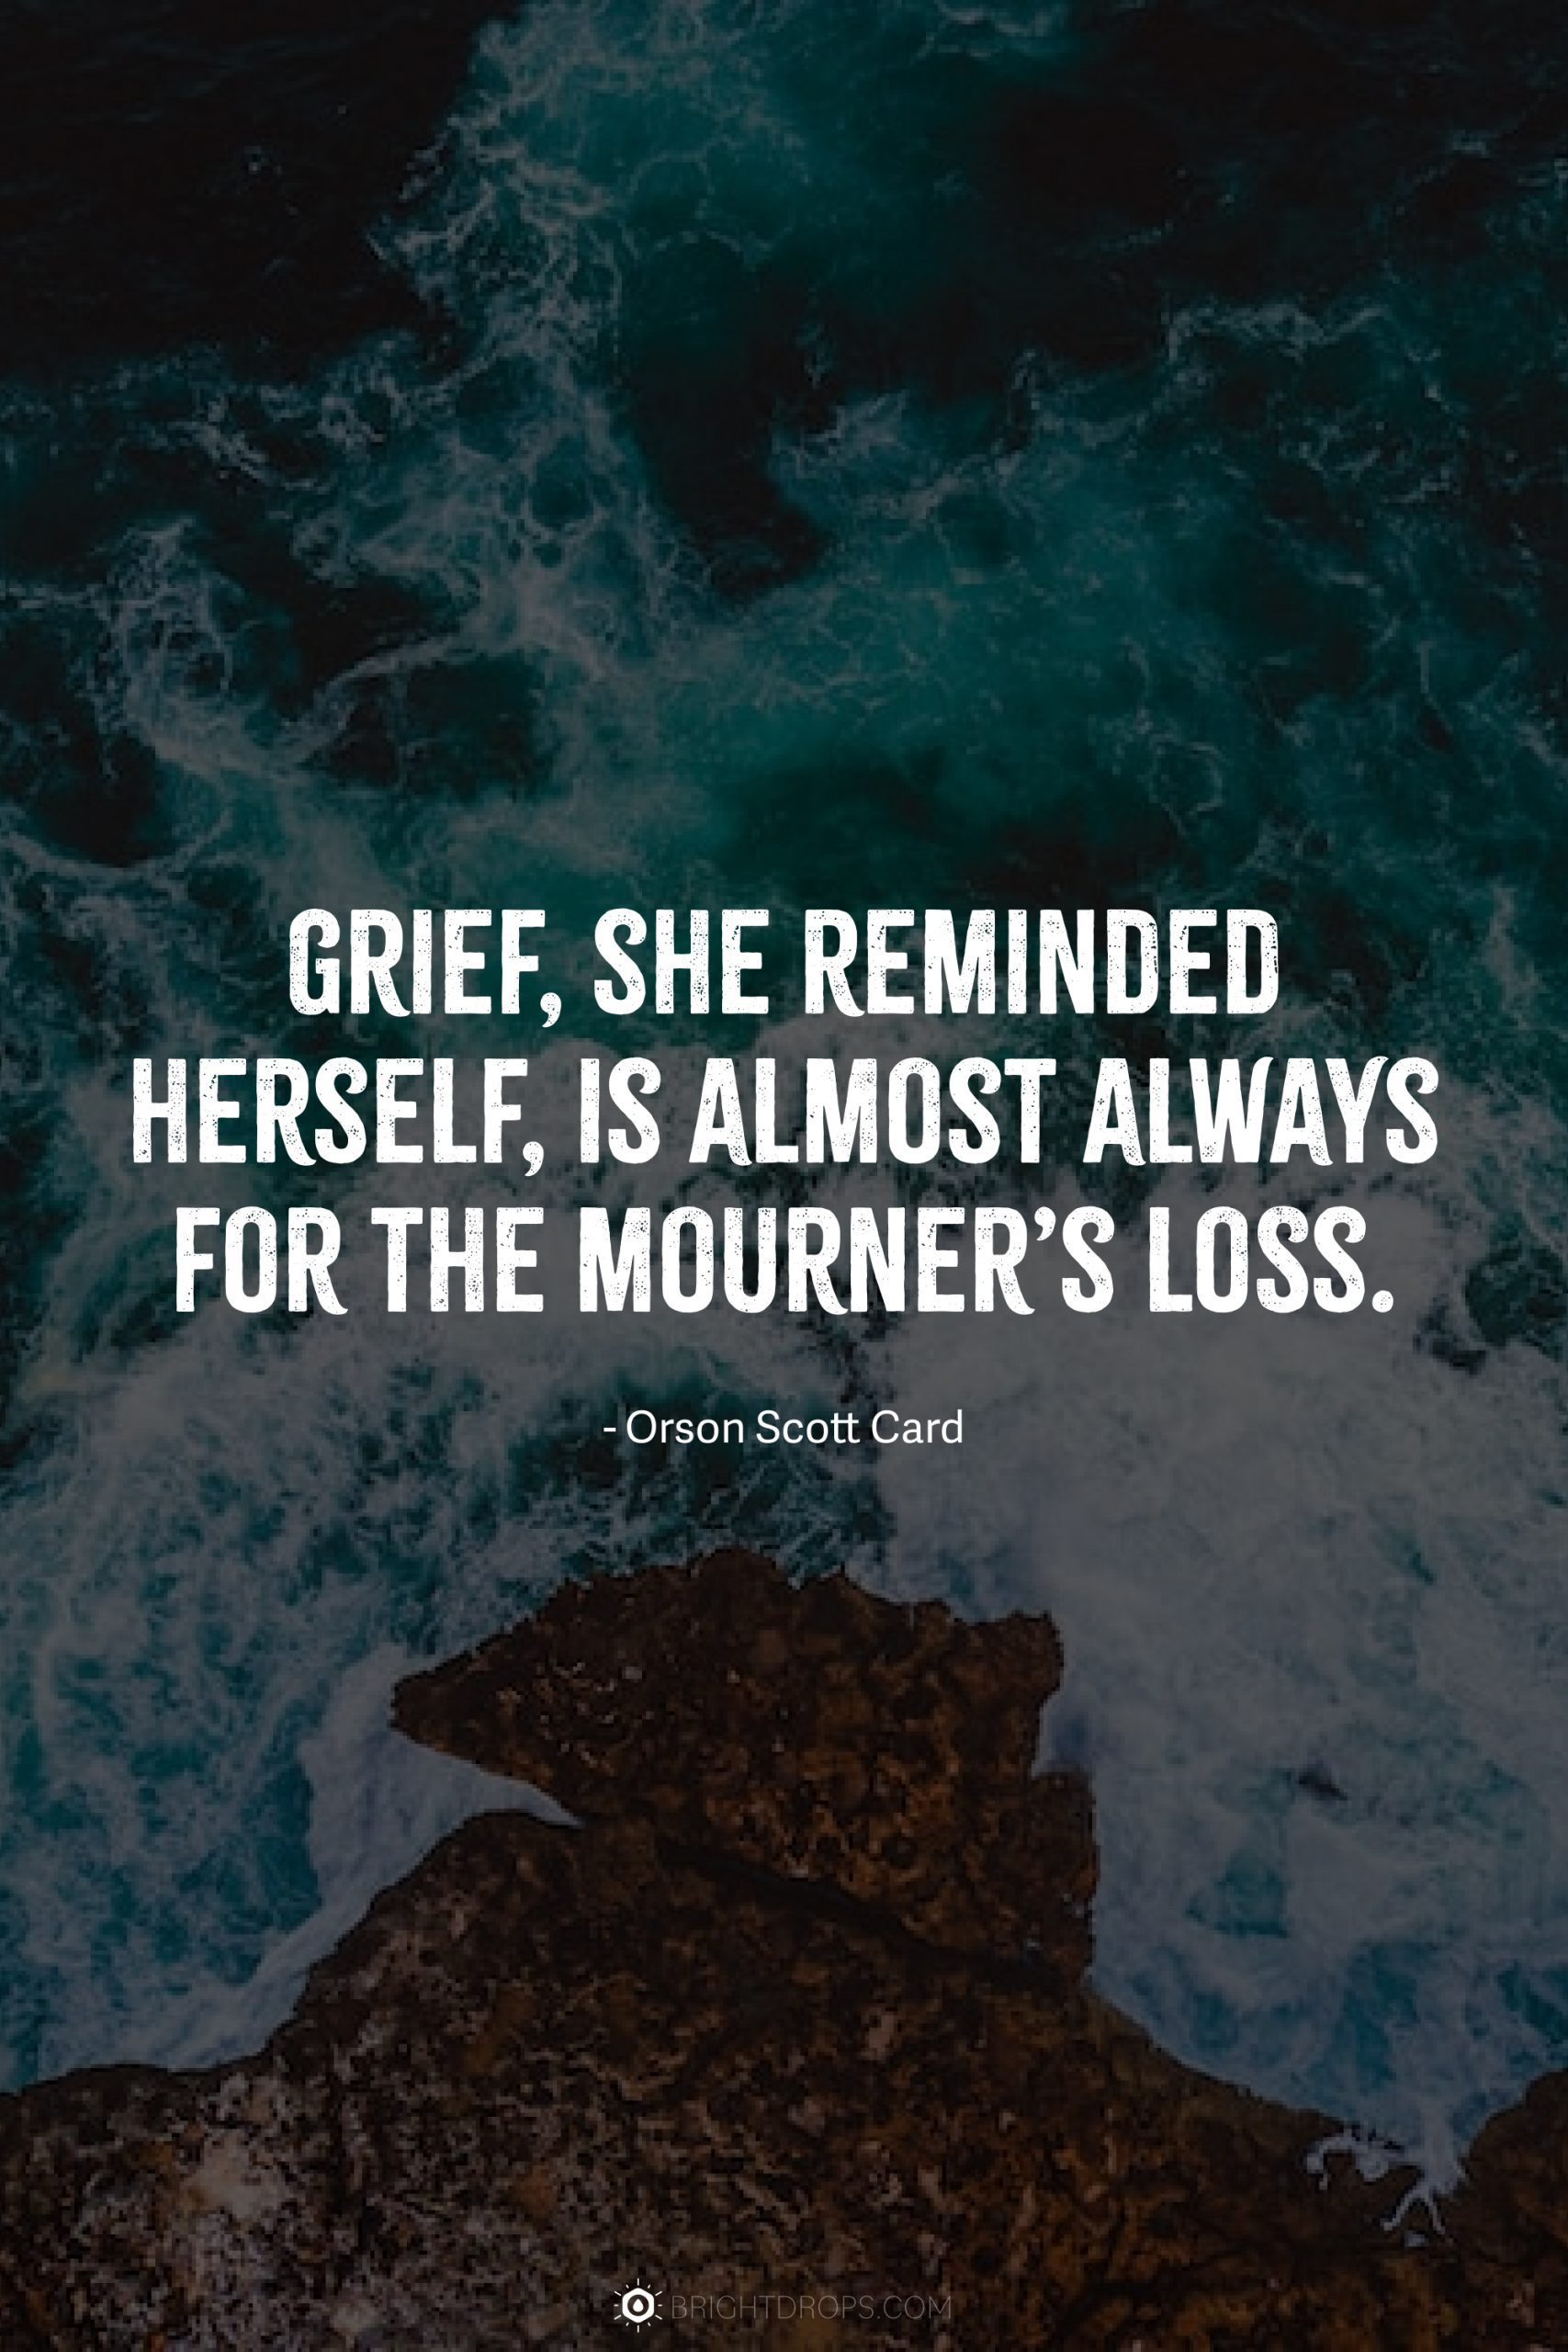 Grief, she reminded herself, is almost always for the mourner’s loss.